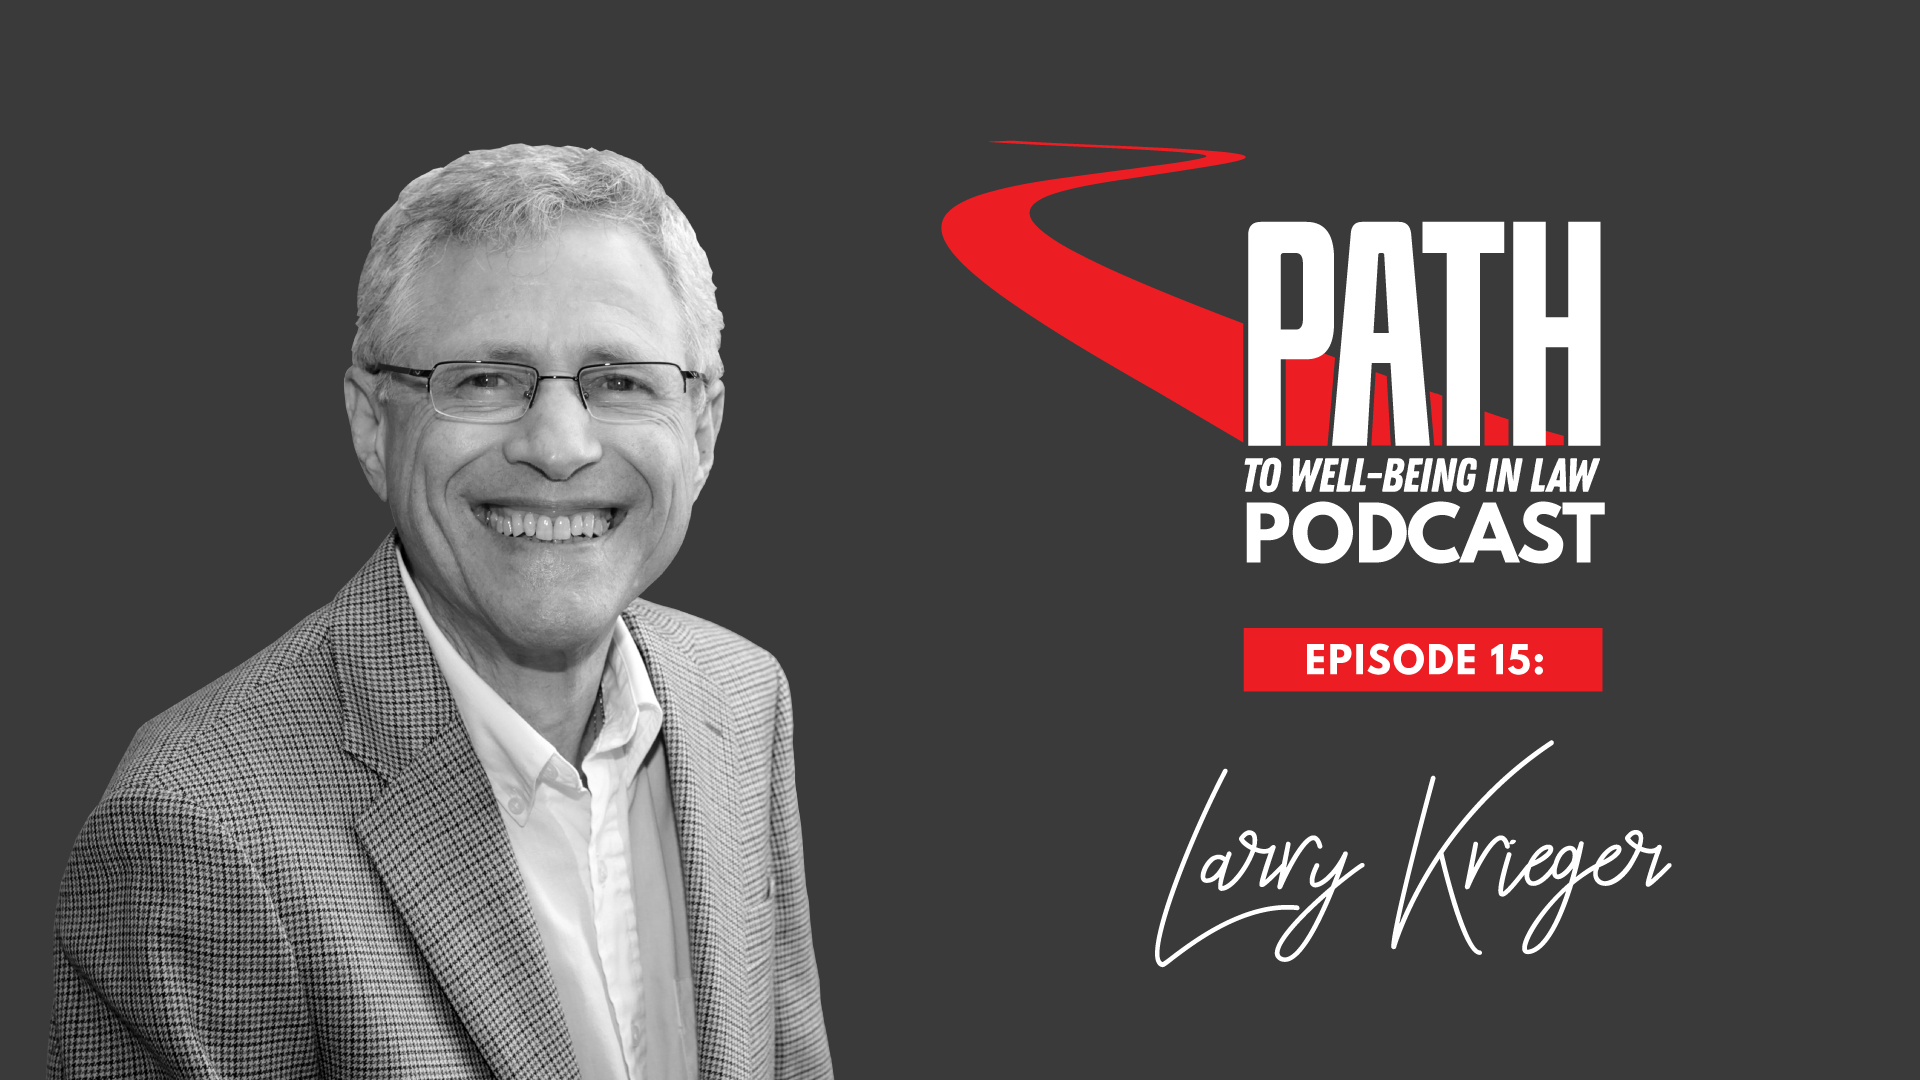 Path To Well-Being In Law: Episode 15 - Larry Krieger